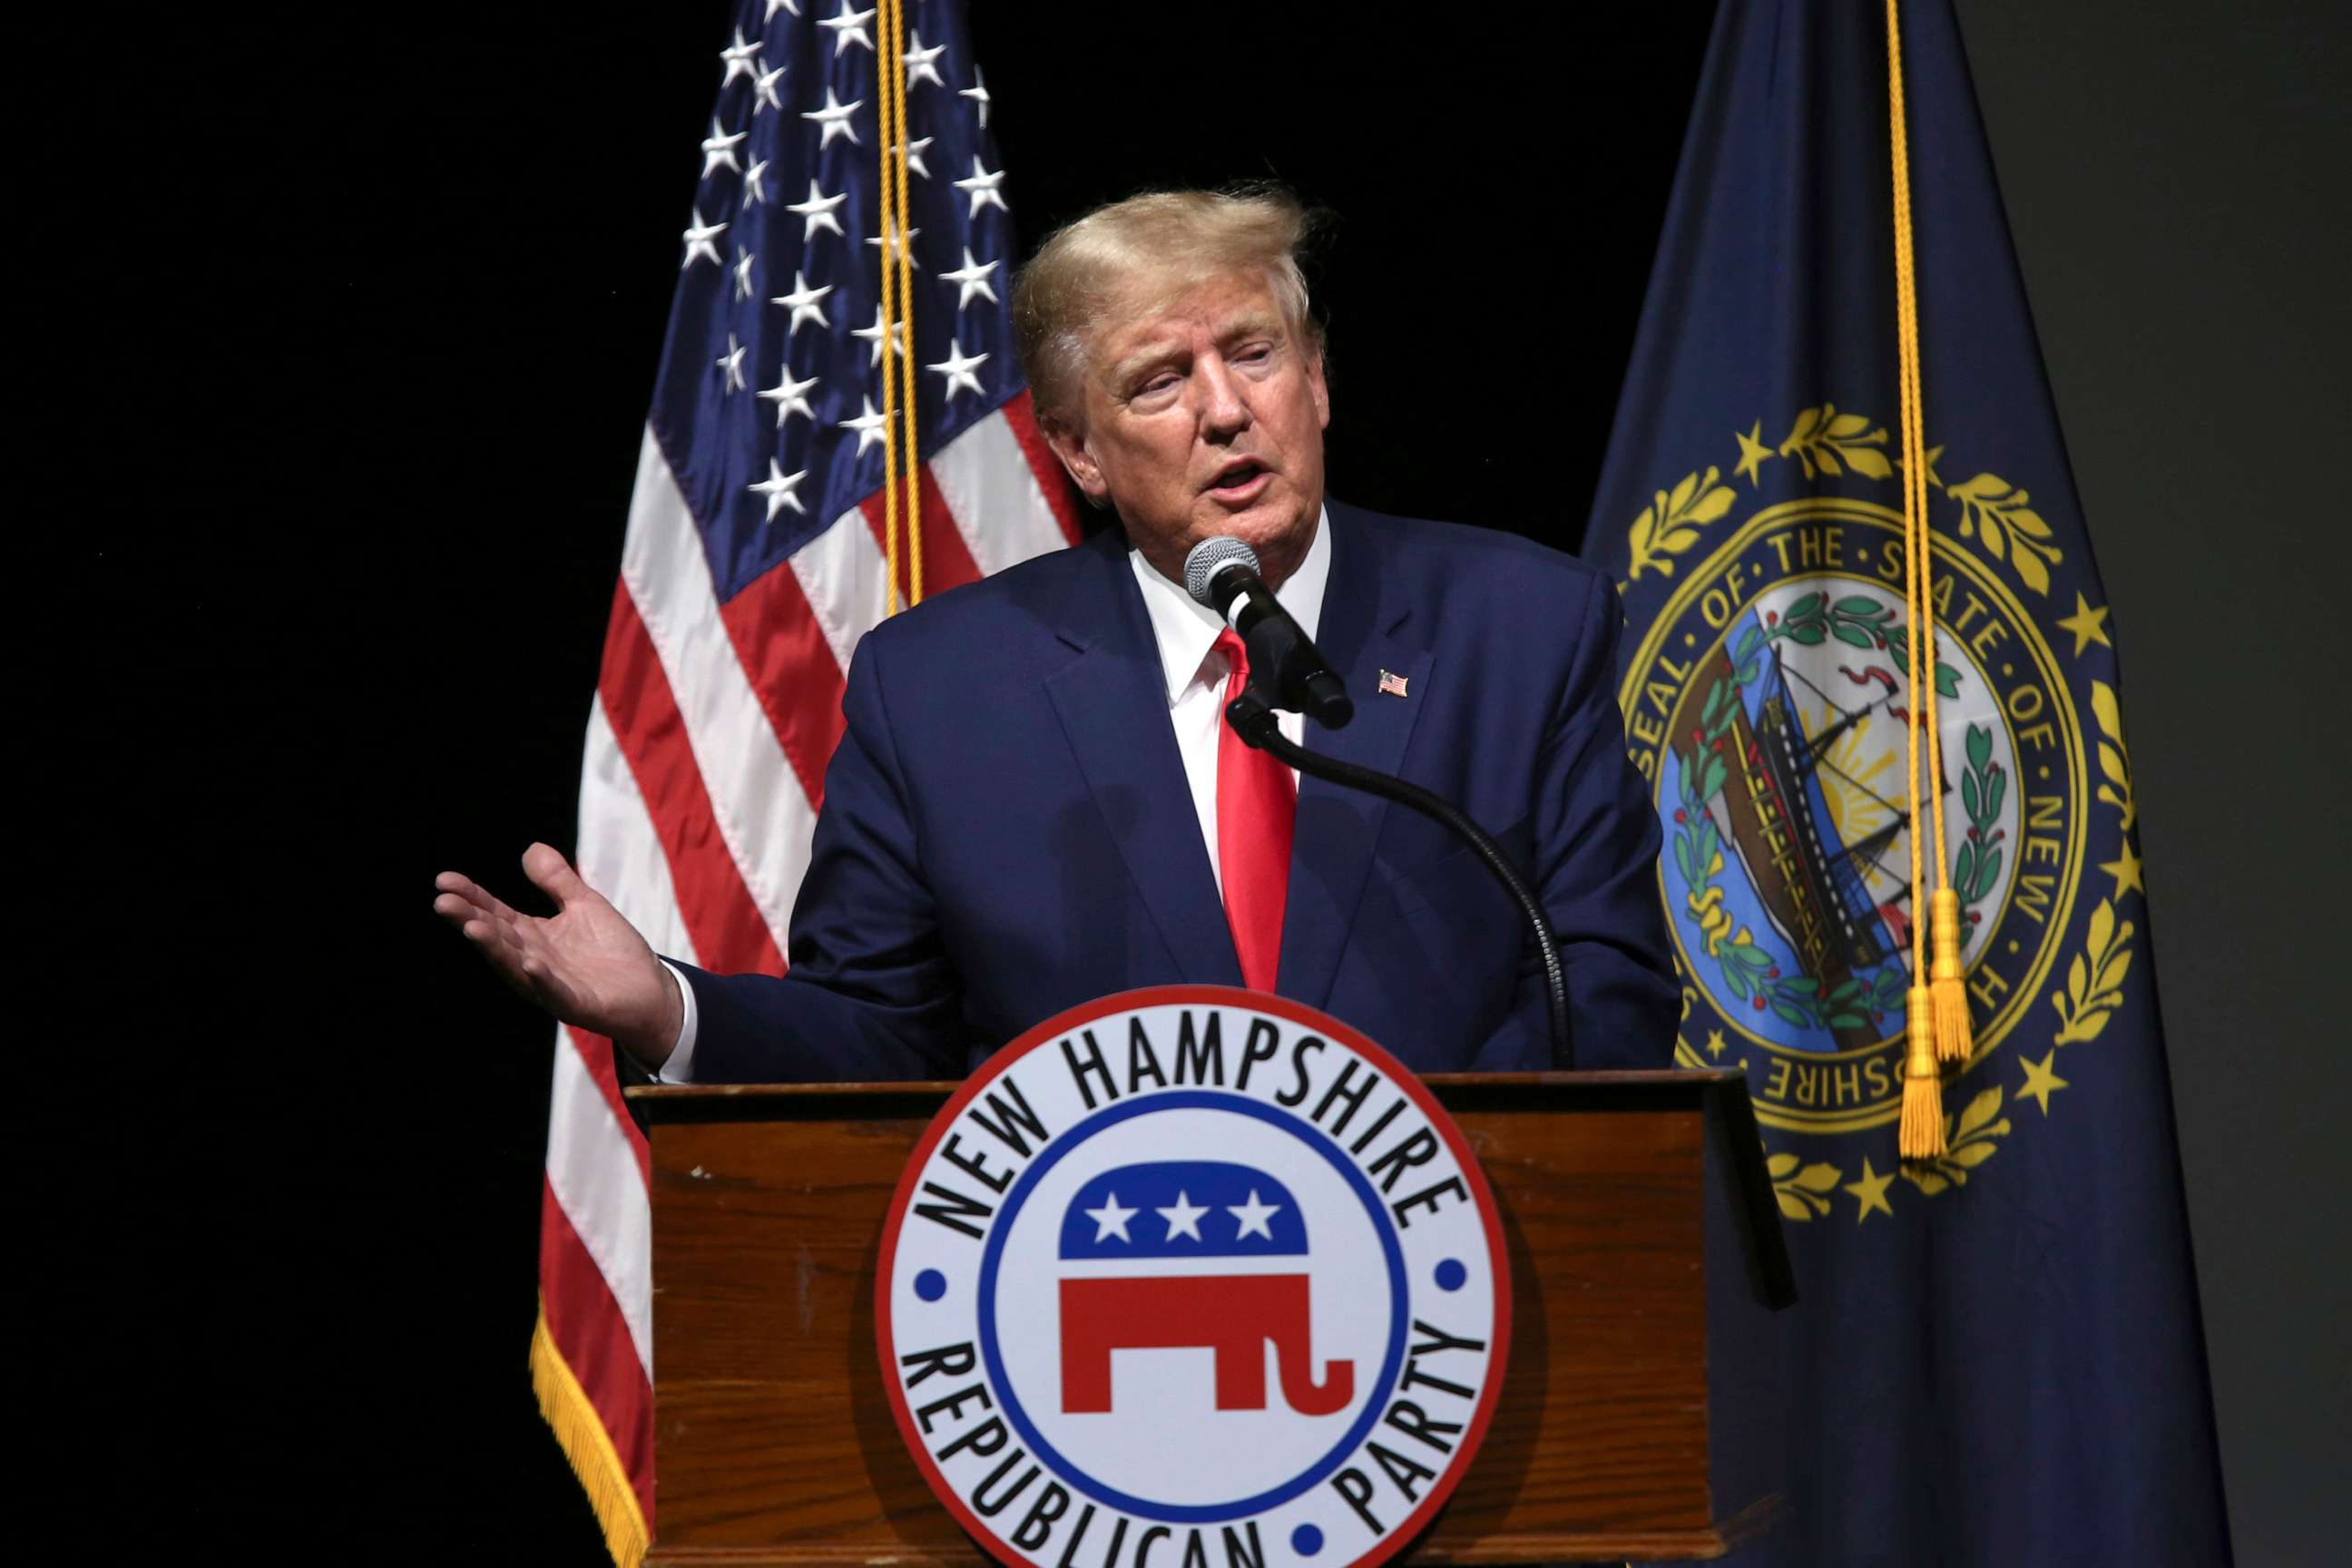 PHOTO: Former President Donald Trump speaks during the New Hampshire Republican State Committee 2023 annual meeting, on Jan. 28, 2023, in Salem, N.H.